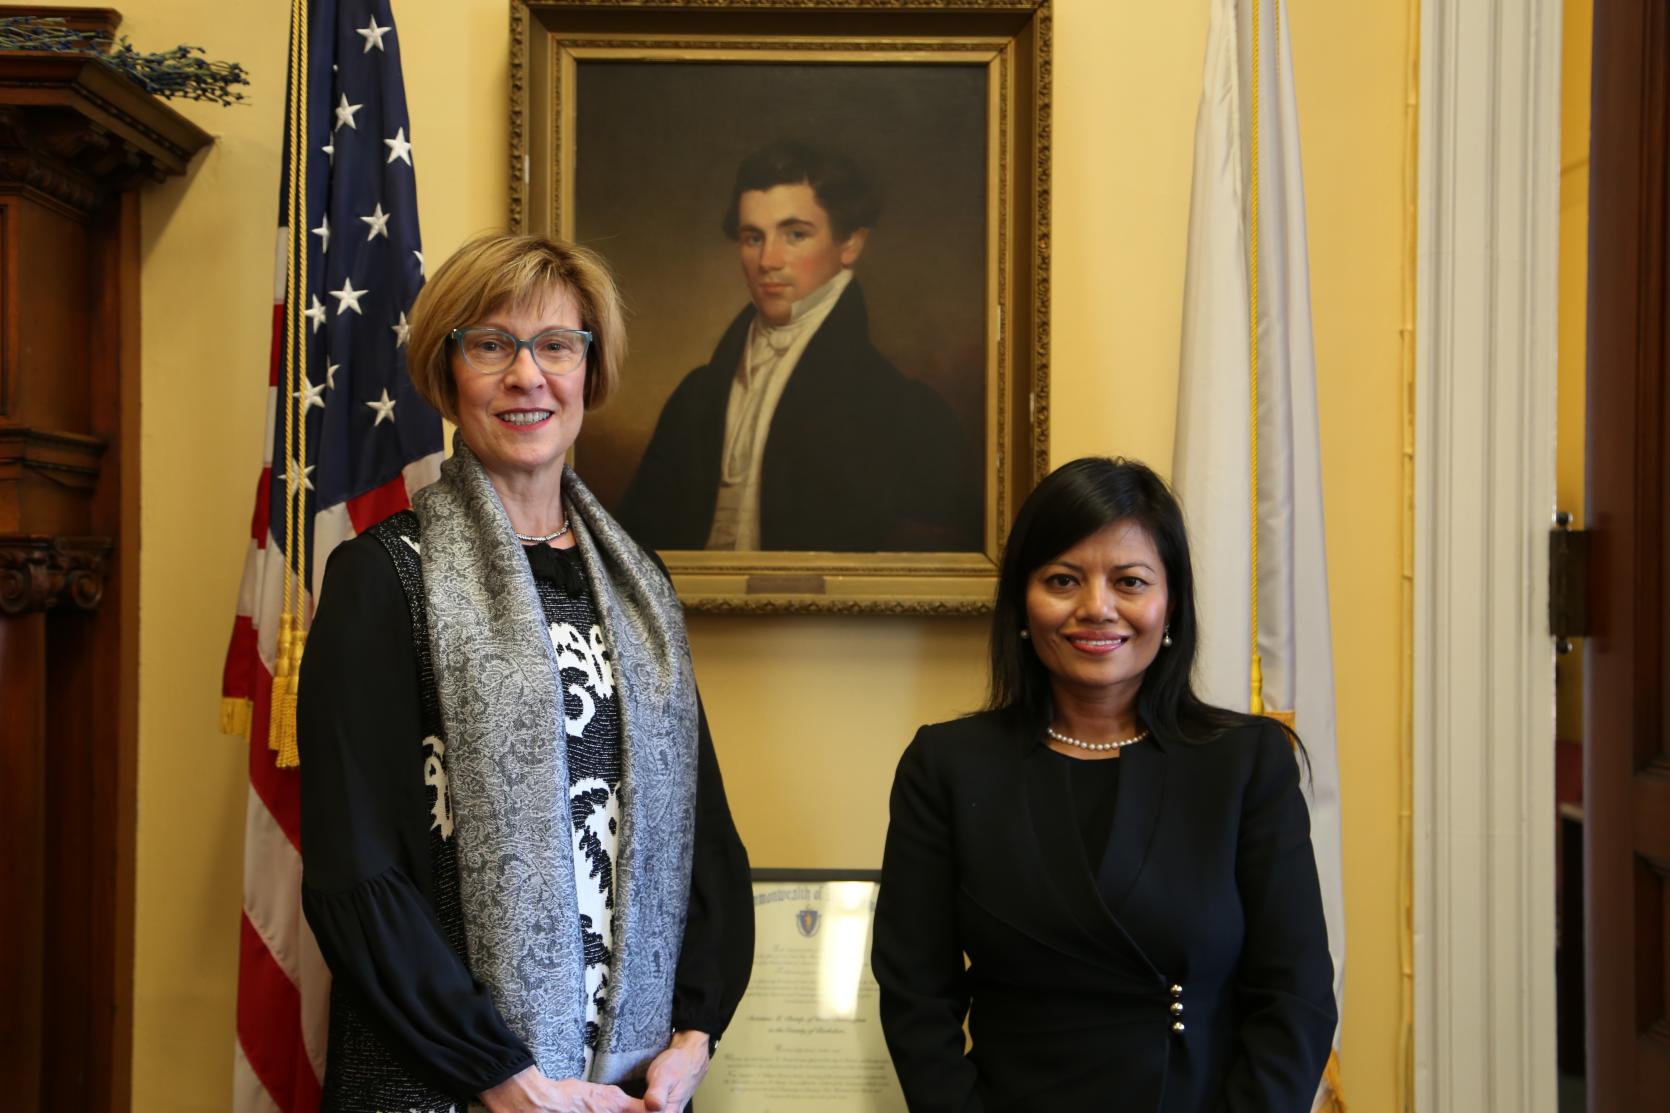 State Auditor Suzanne M. Bump with Vanna Howard, her appointee to the Asian American Commission.